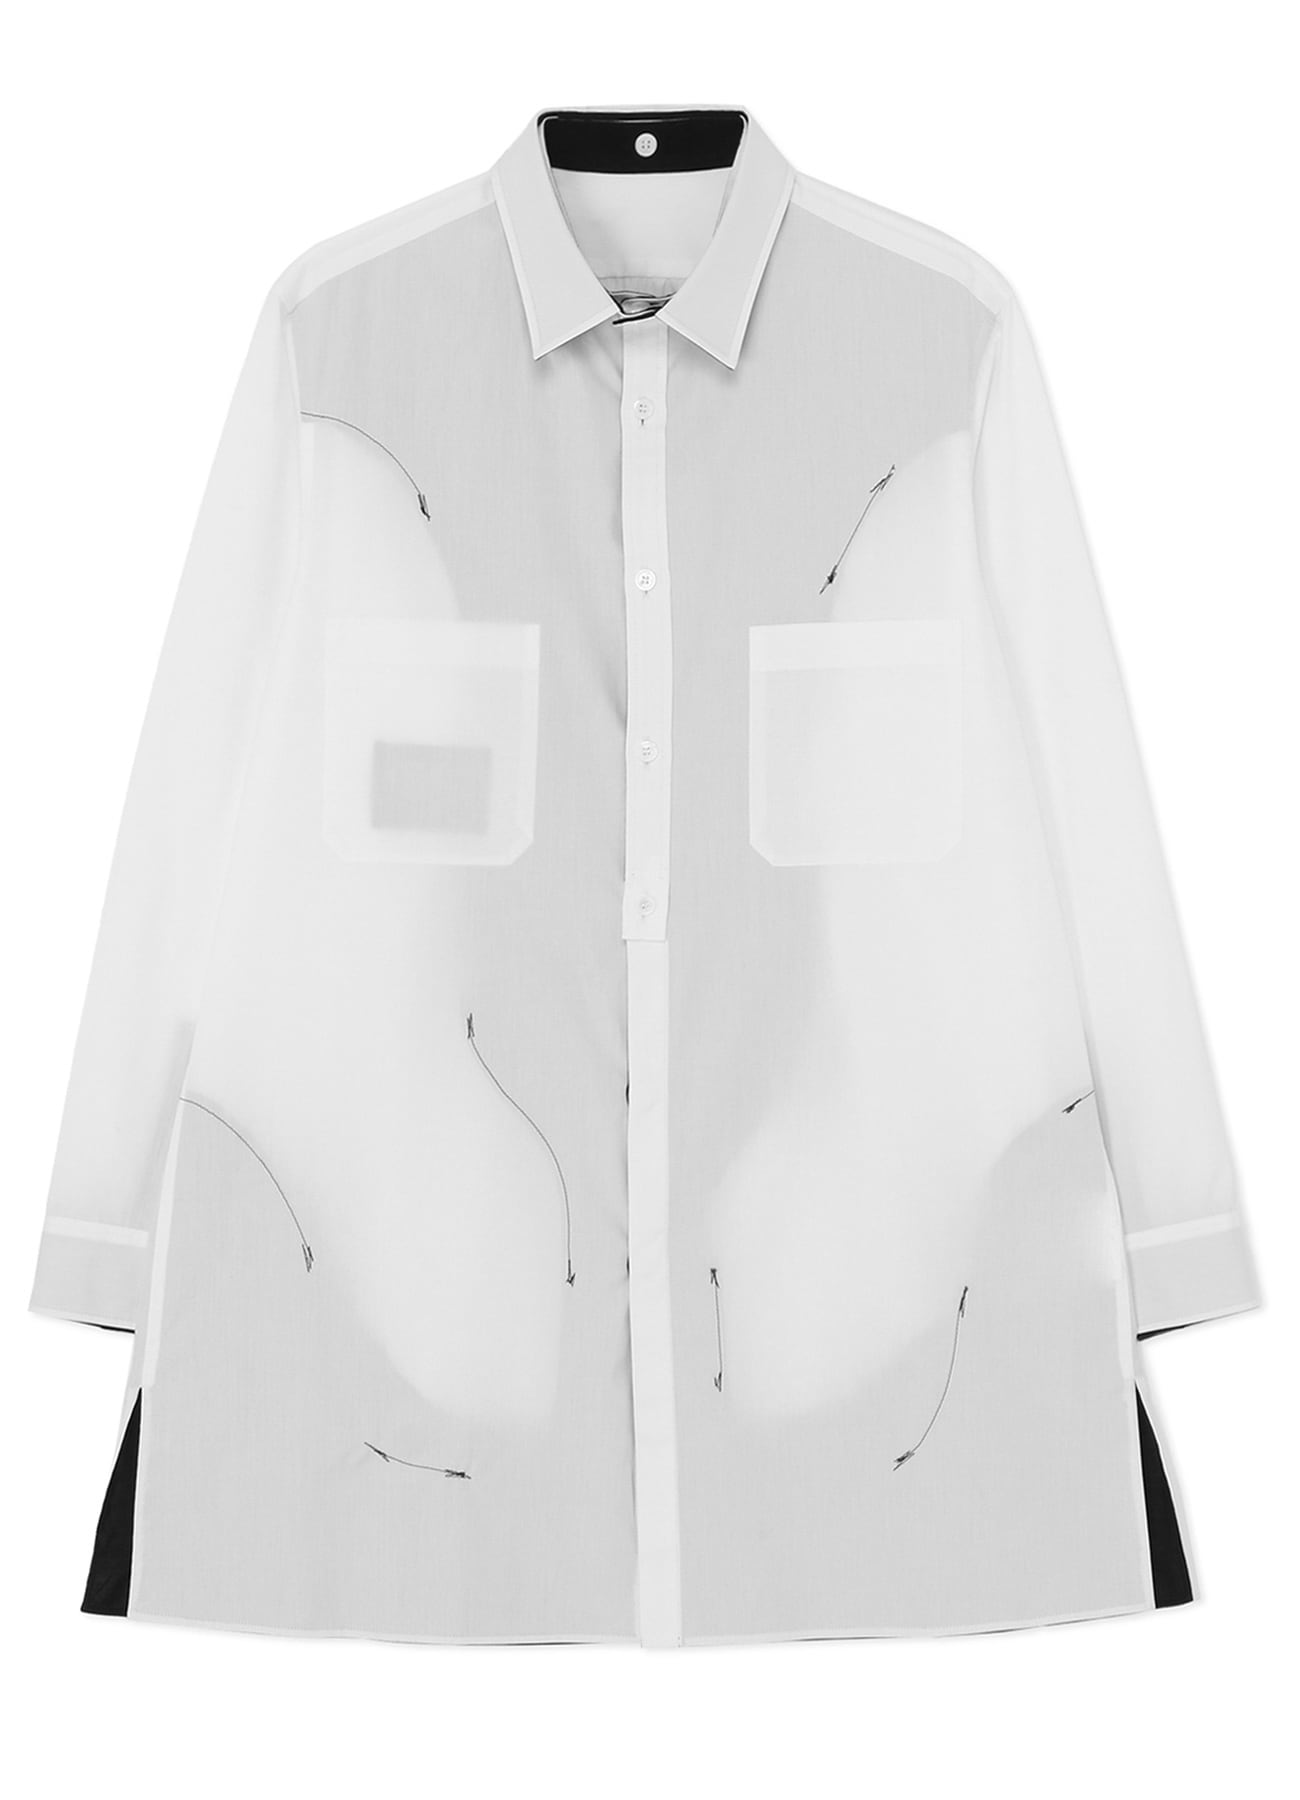 BLACK AND WHITE SHIRT WITH DECONSTRUCTED COLLAR(S White): power of 